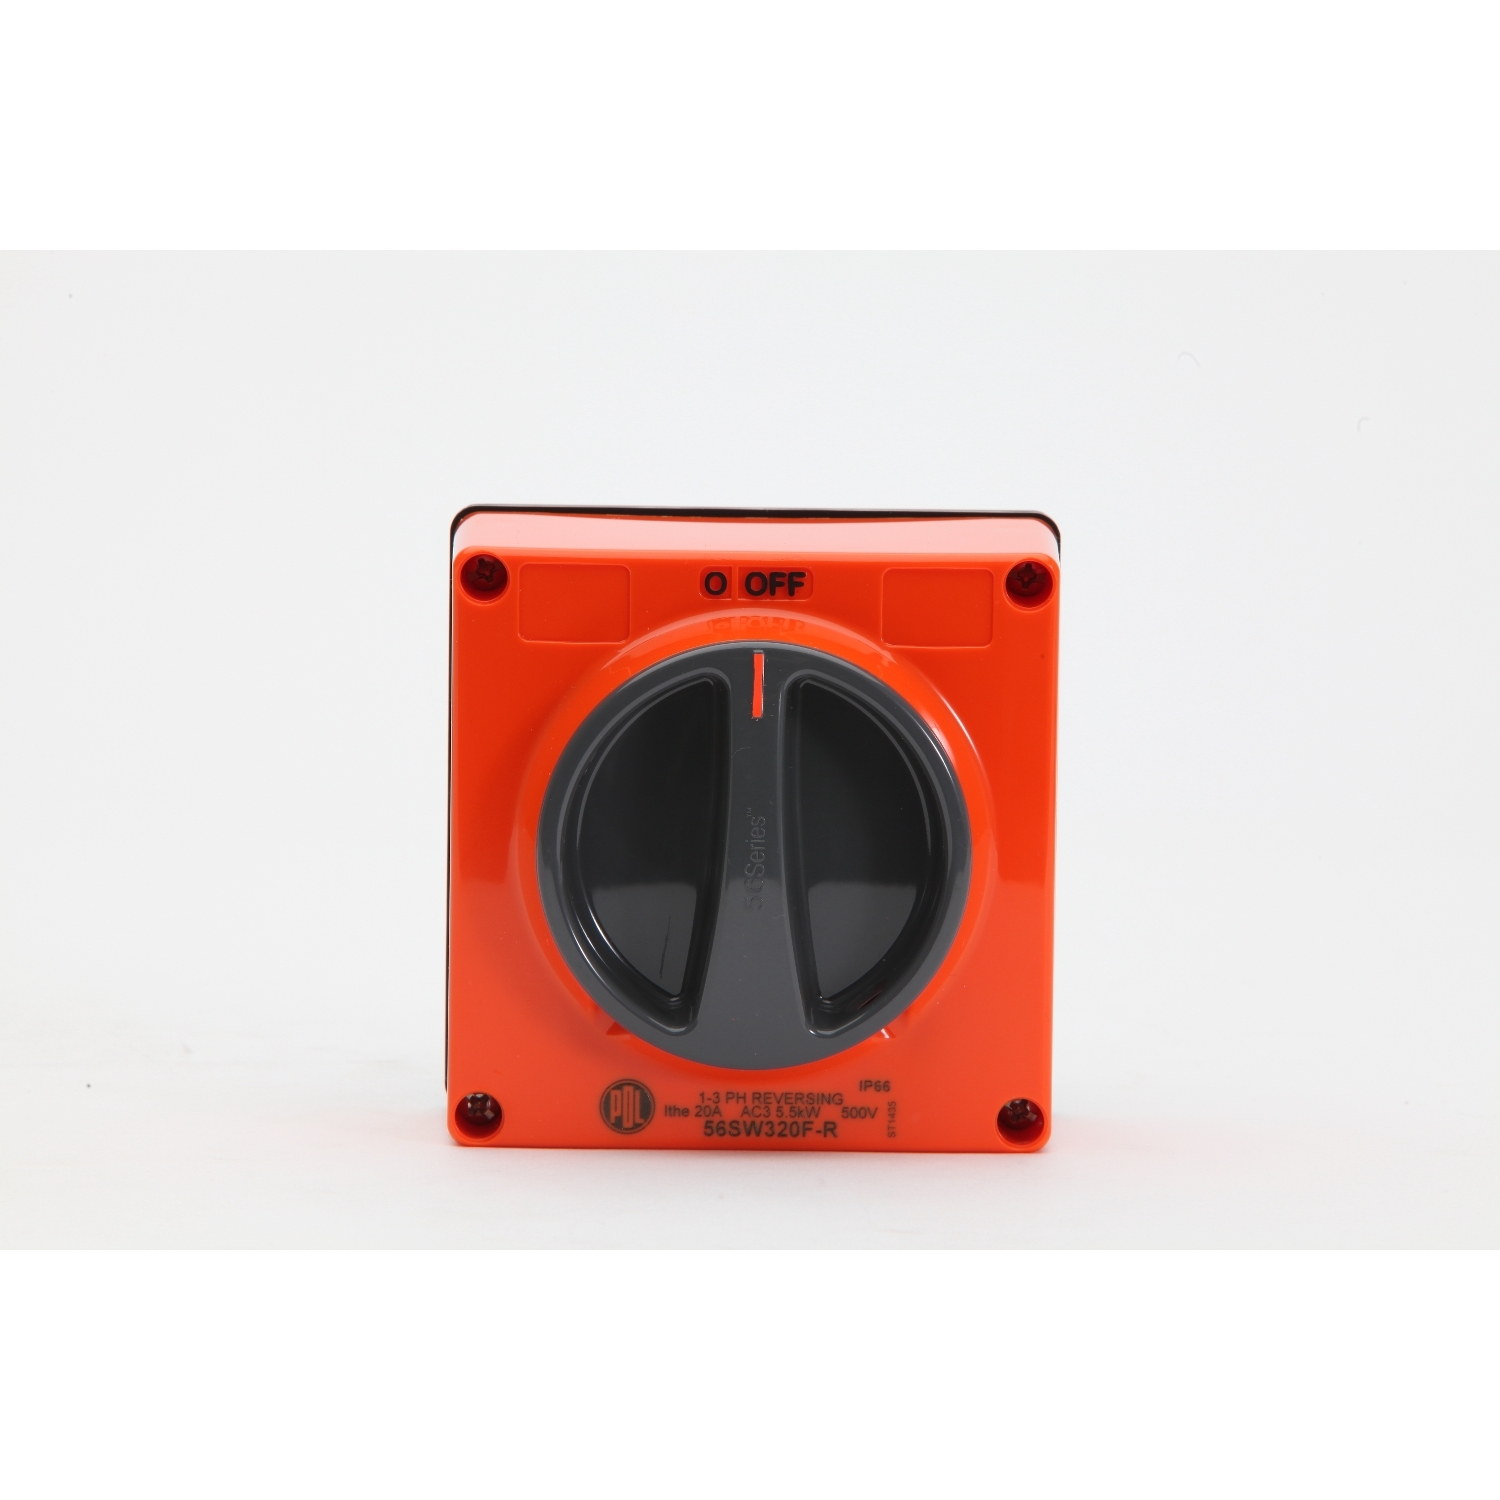 PDL 56 Series - Forward/Reverse Switch 20A 500V 3-Pole IP66 - Chemical-Resistant Orange